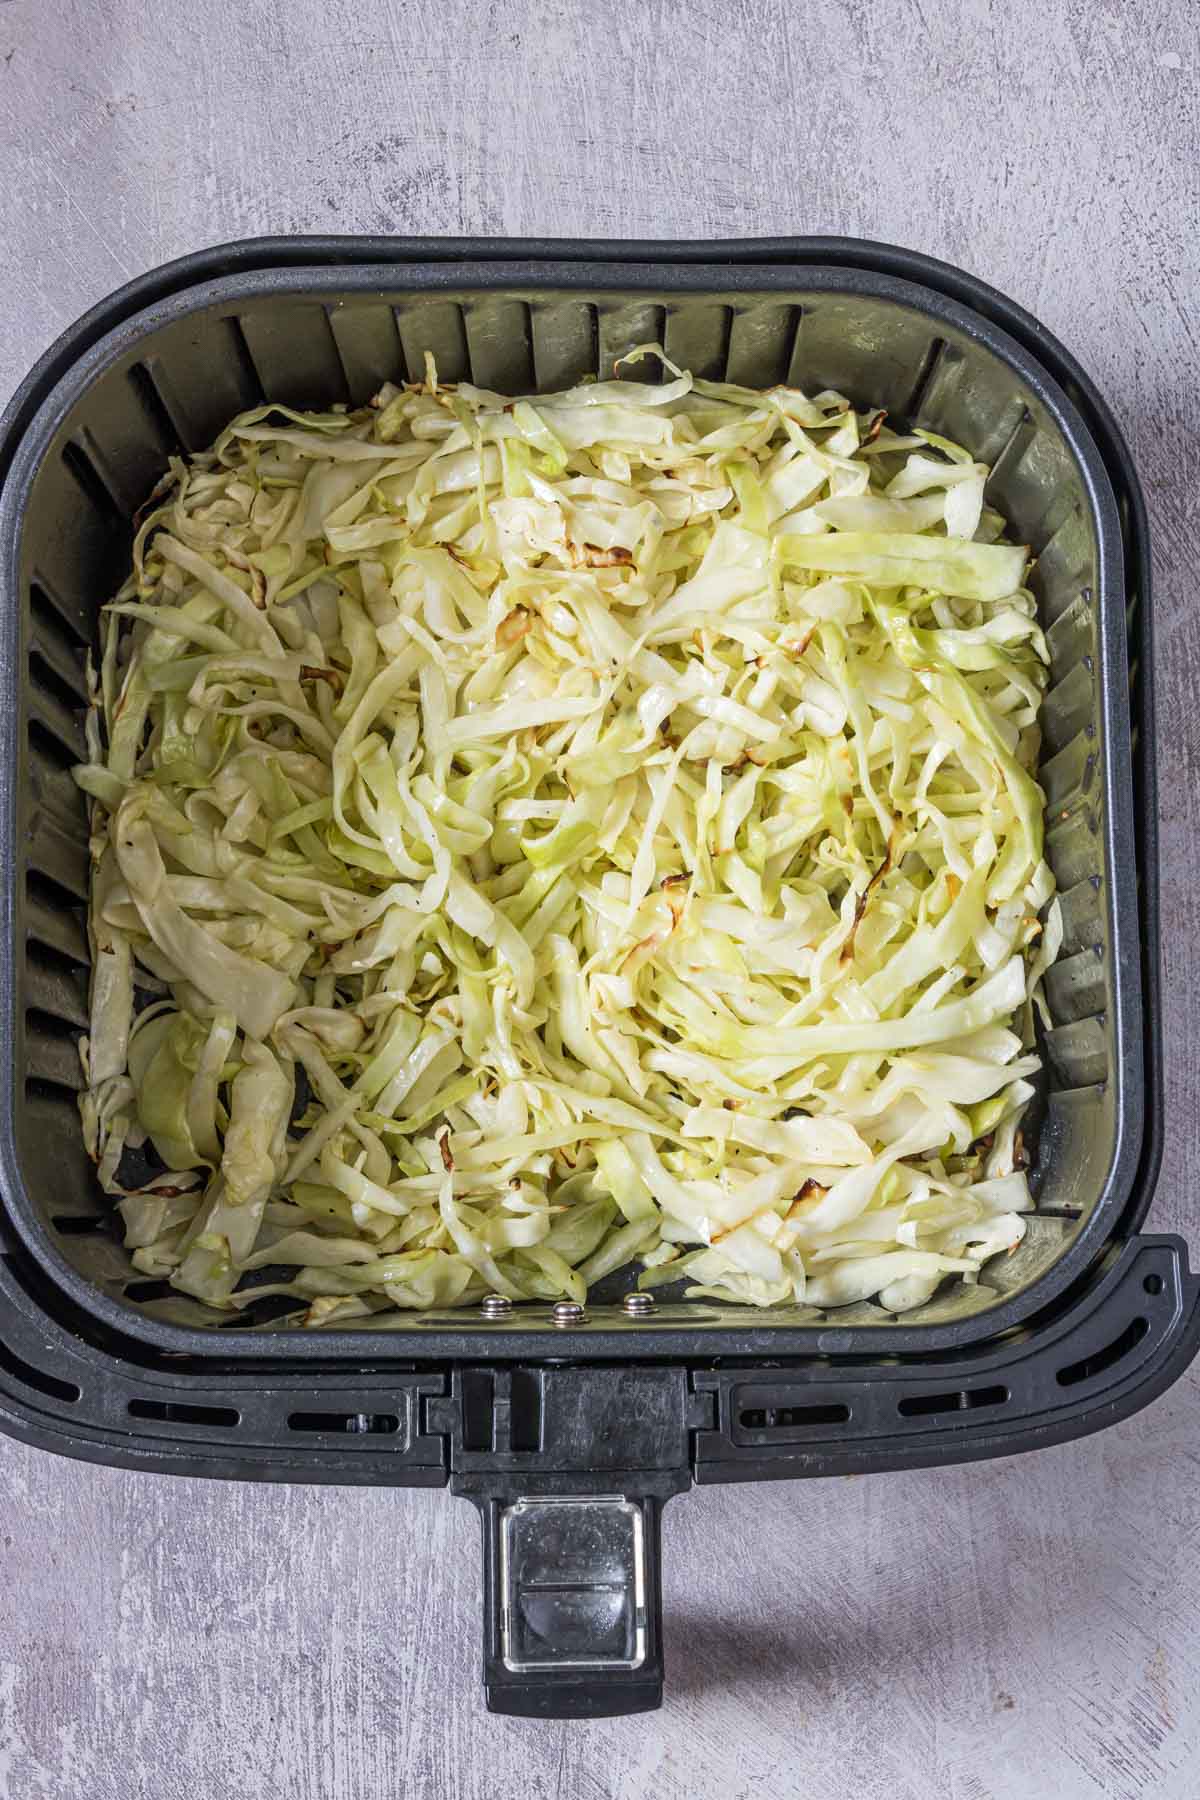 the completed air fryer cabbage recipe inside the air fryer basket.